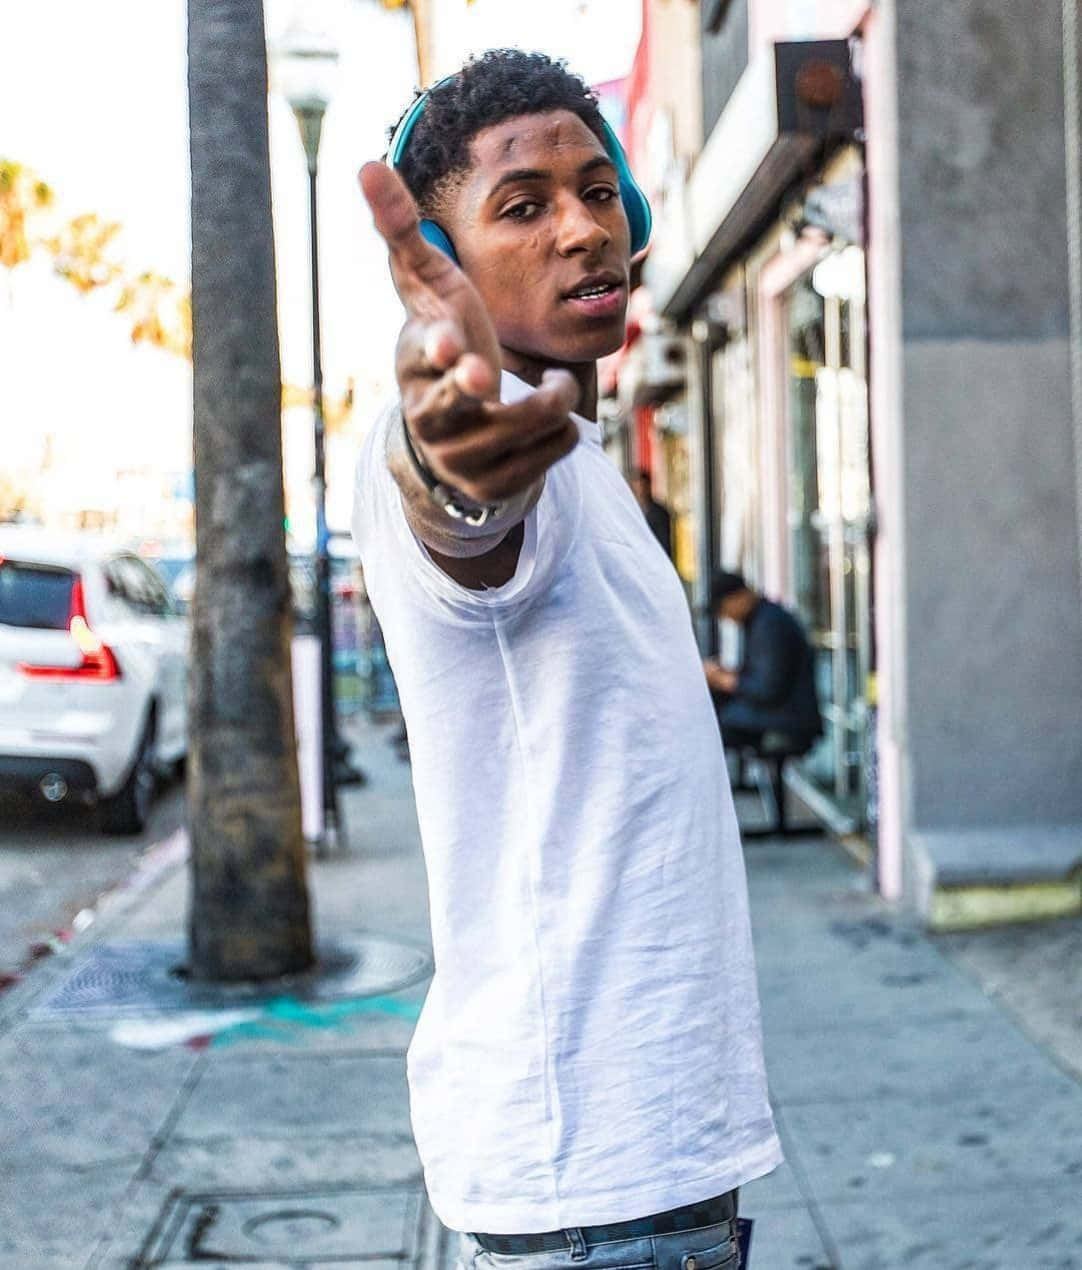 Download Nba Youngboy Pictures | Wallpapers.com